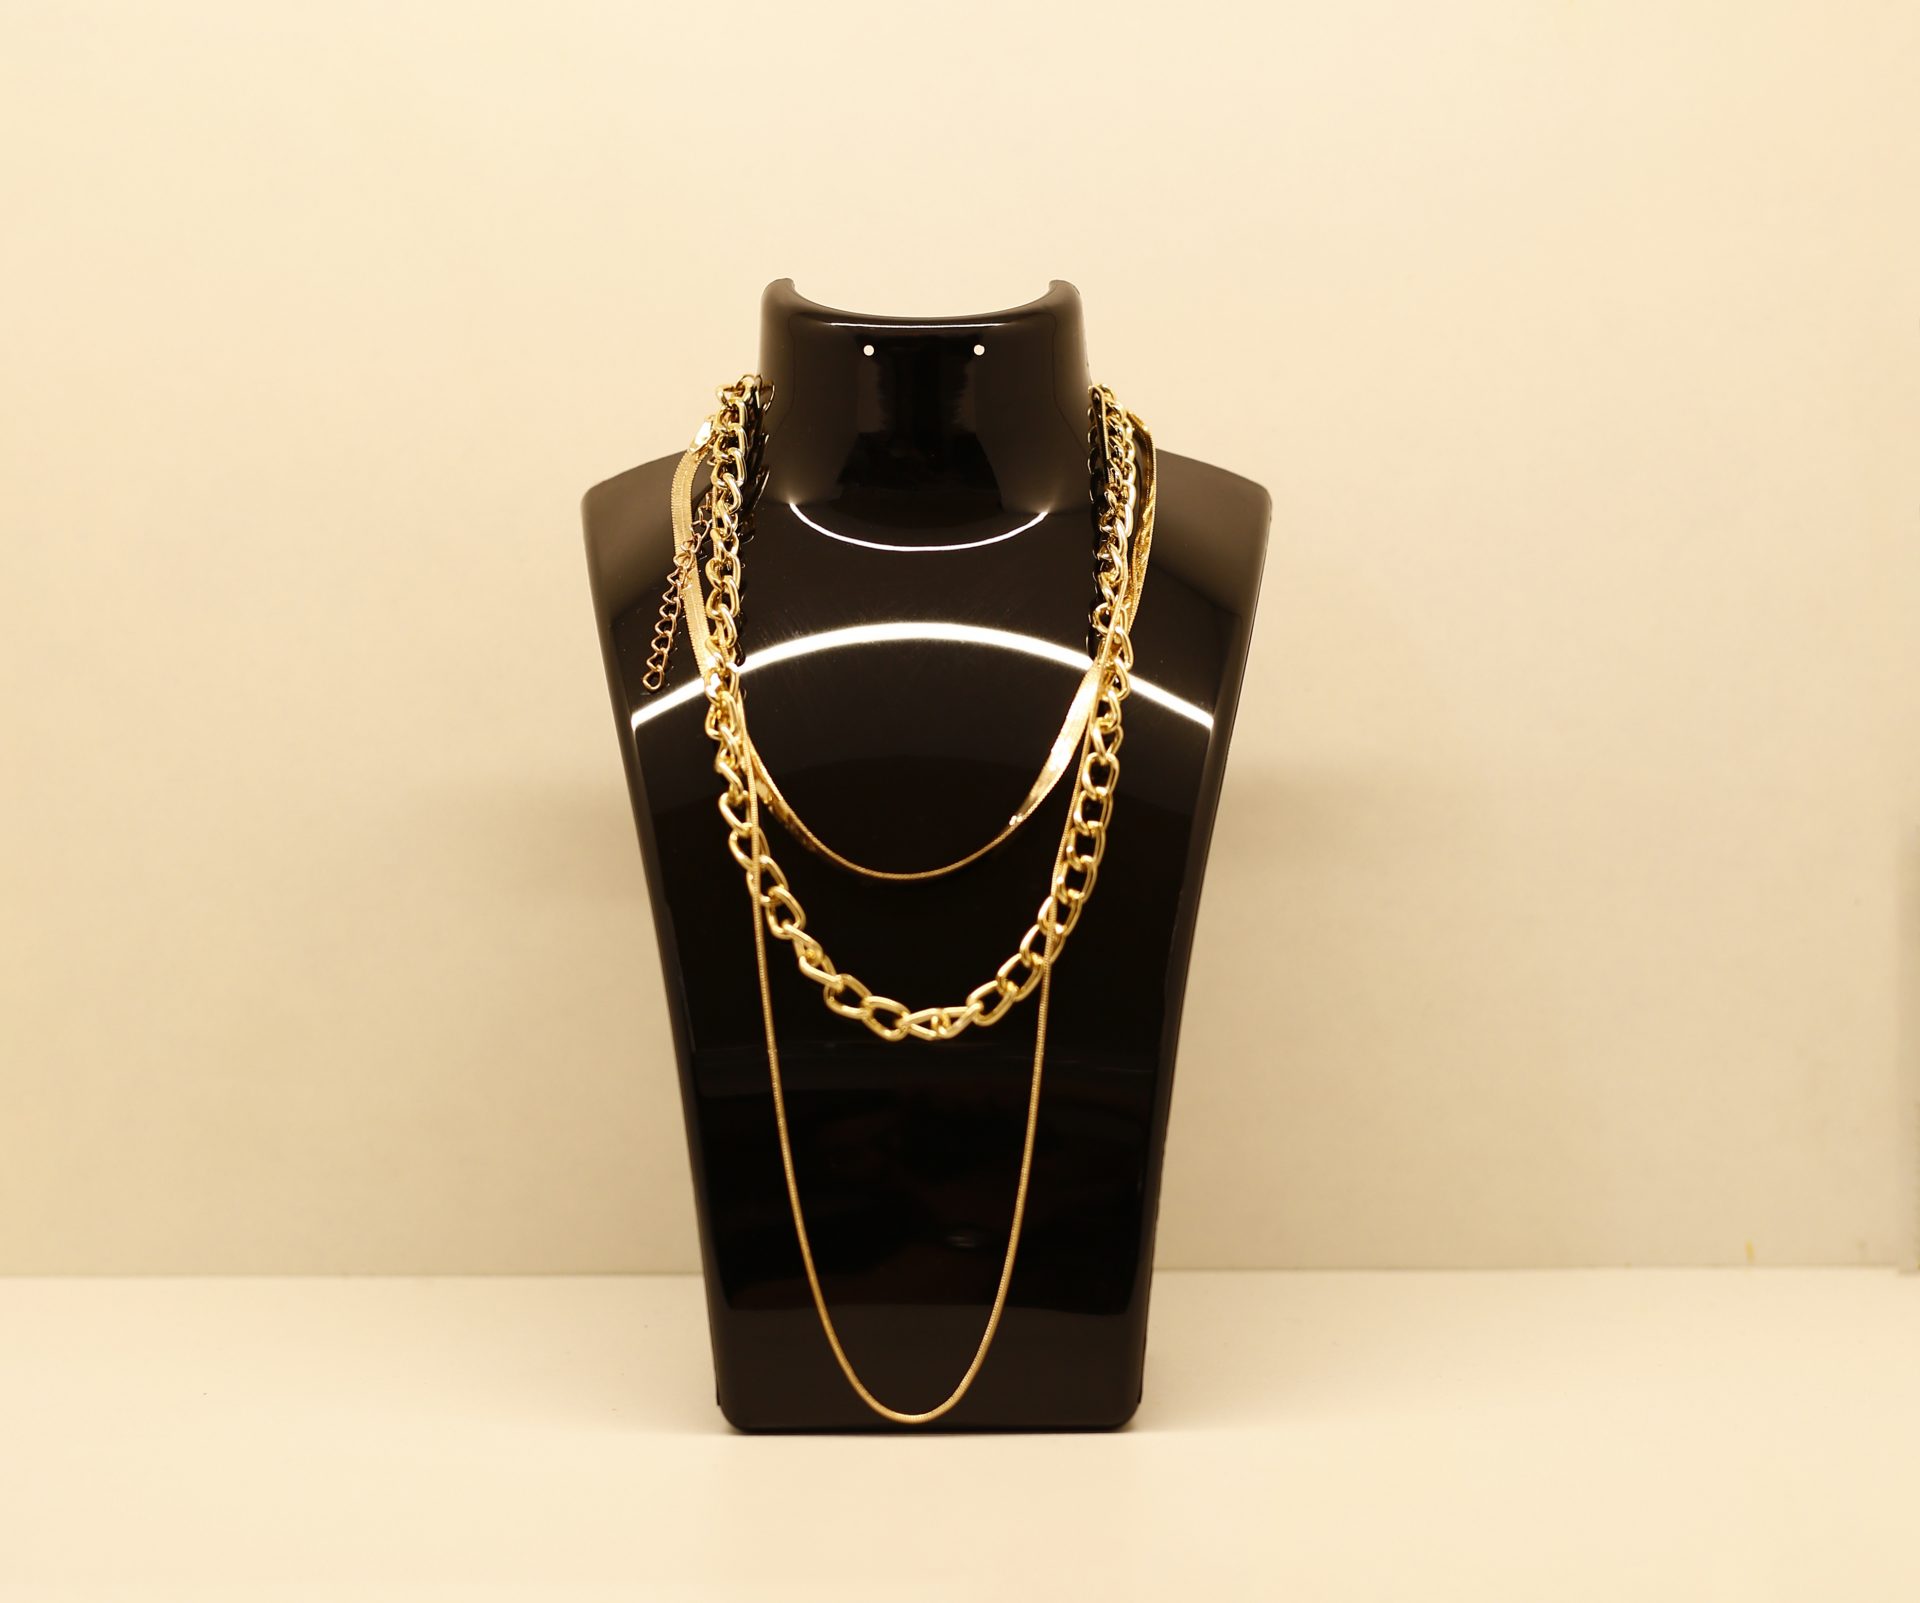 So Icy Jewelry’s 10k gold chains for men